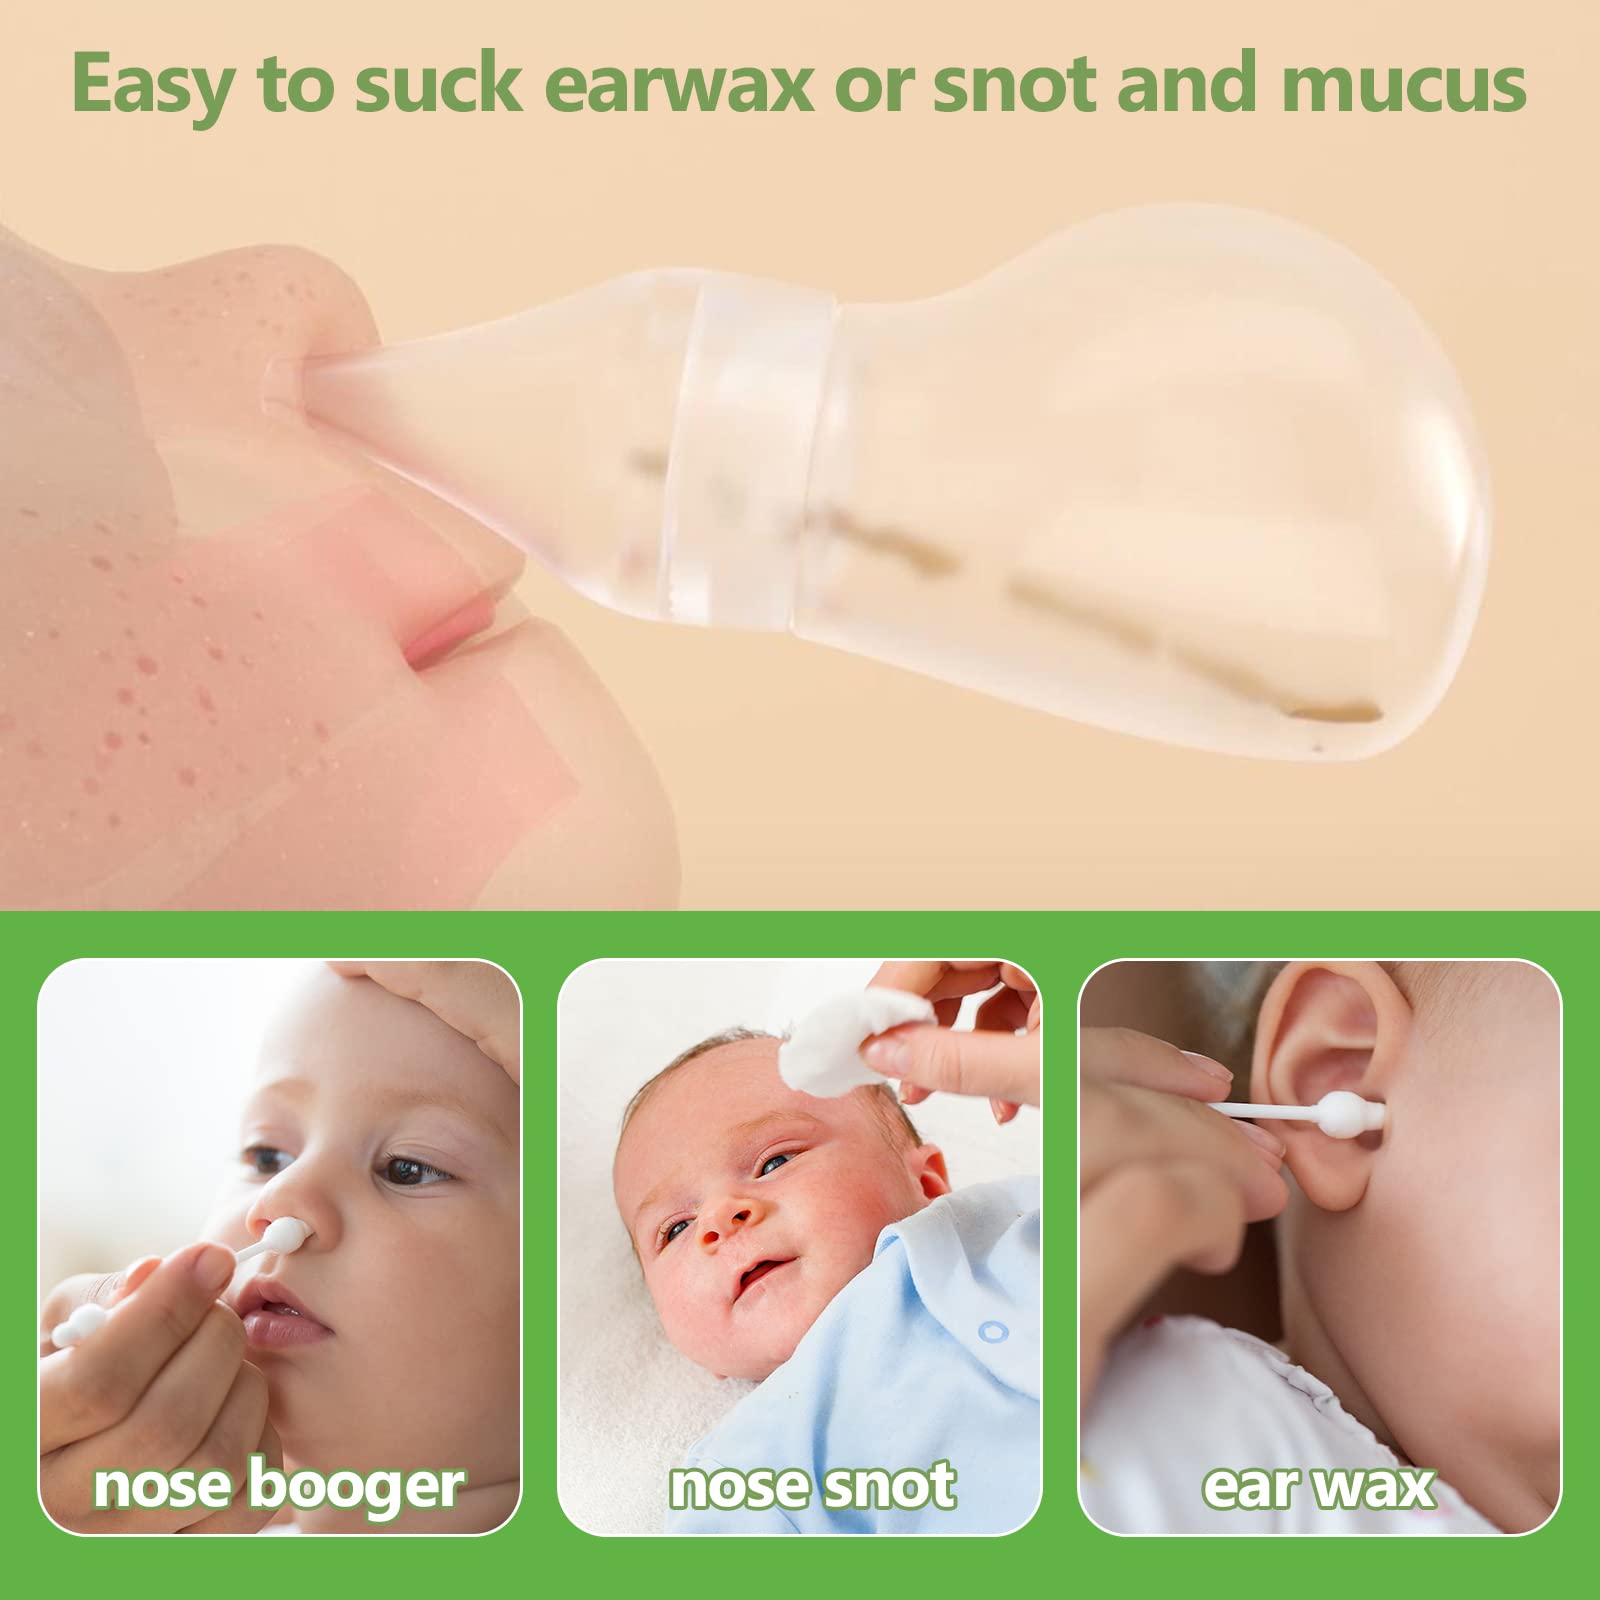 haakaa Silicone Nibble Freezer Tray&Baby Nasal Aspirator Set-Baby Nose Cleaner | Easy-Squeeze Nose Bulb Syringe- BPA Free Silicone-Baby Nose Cleaner